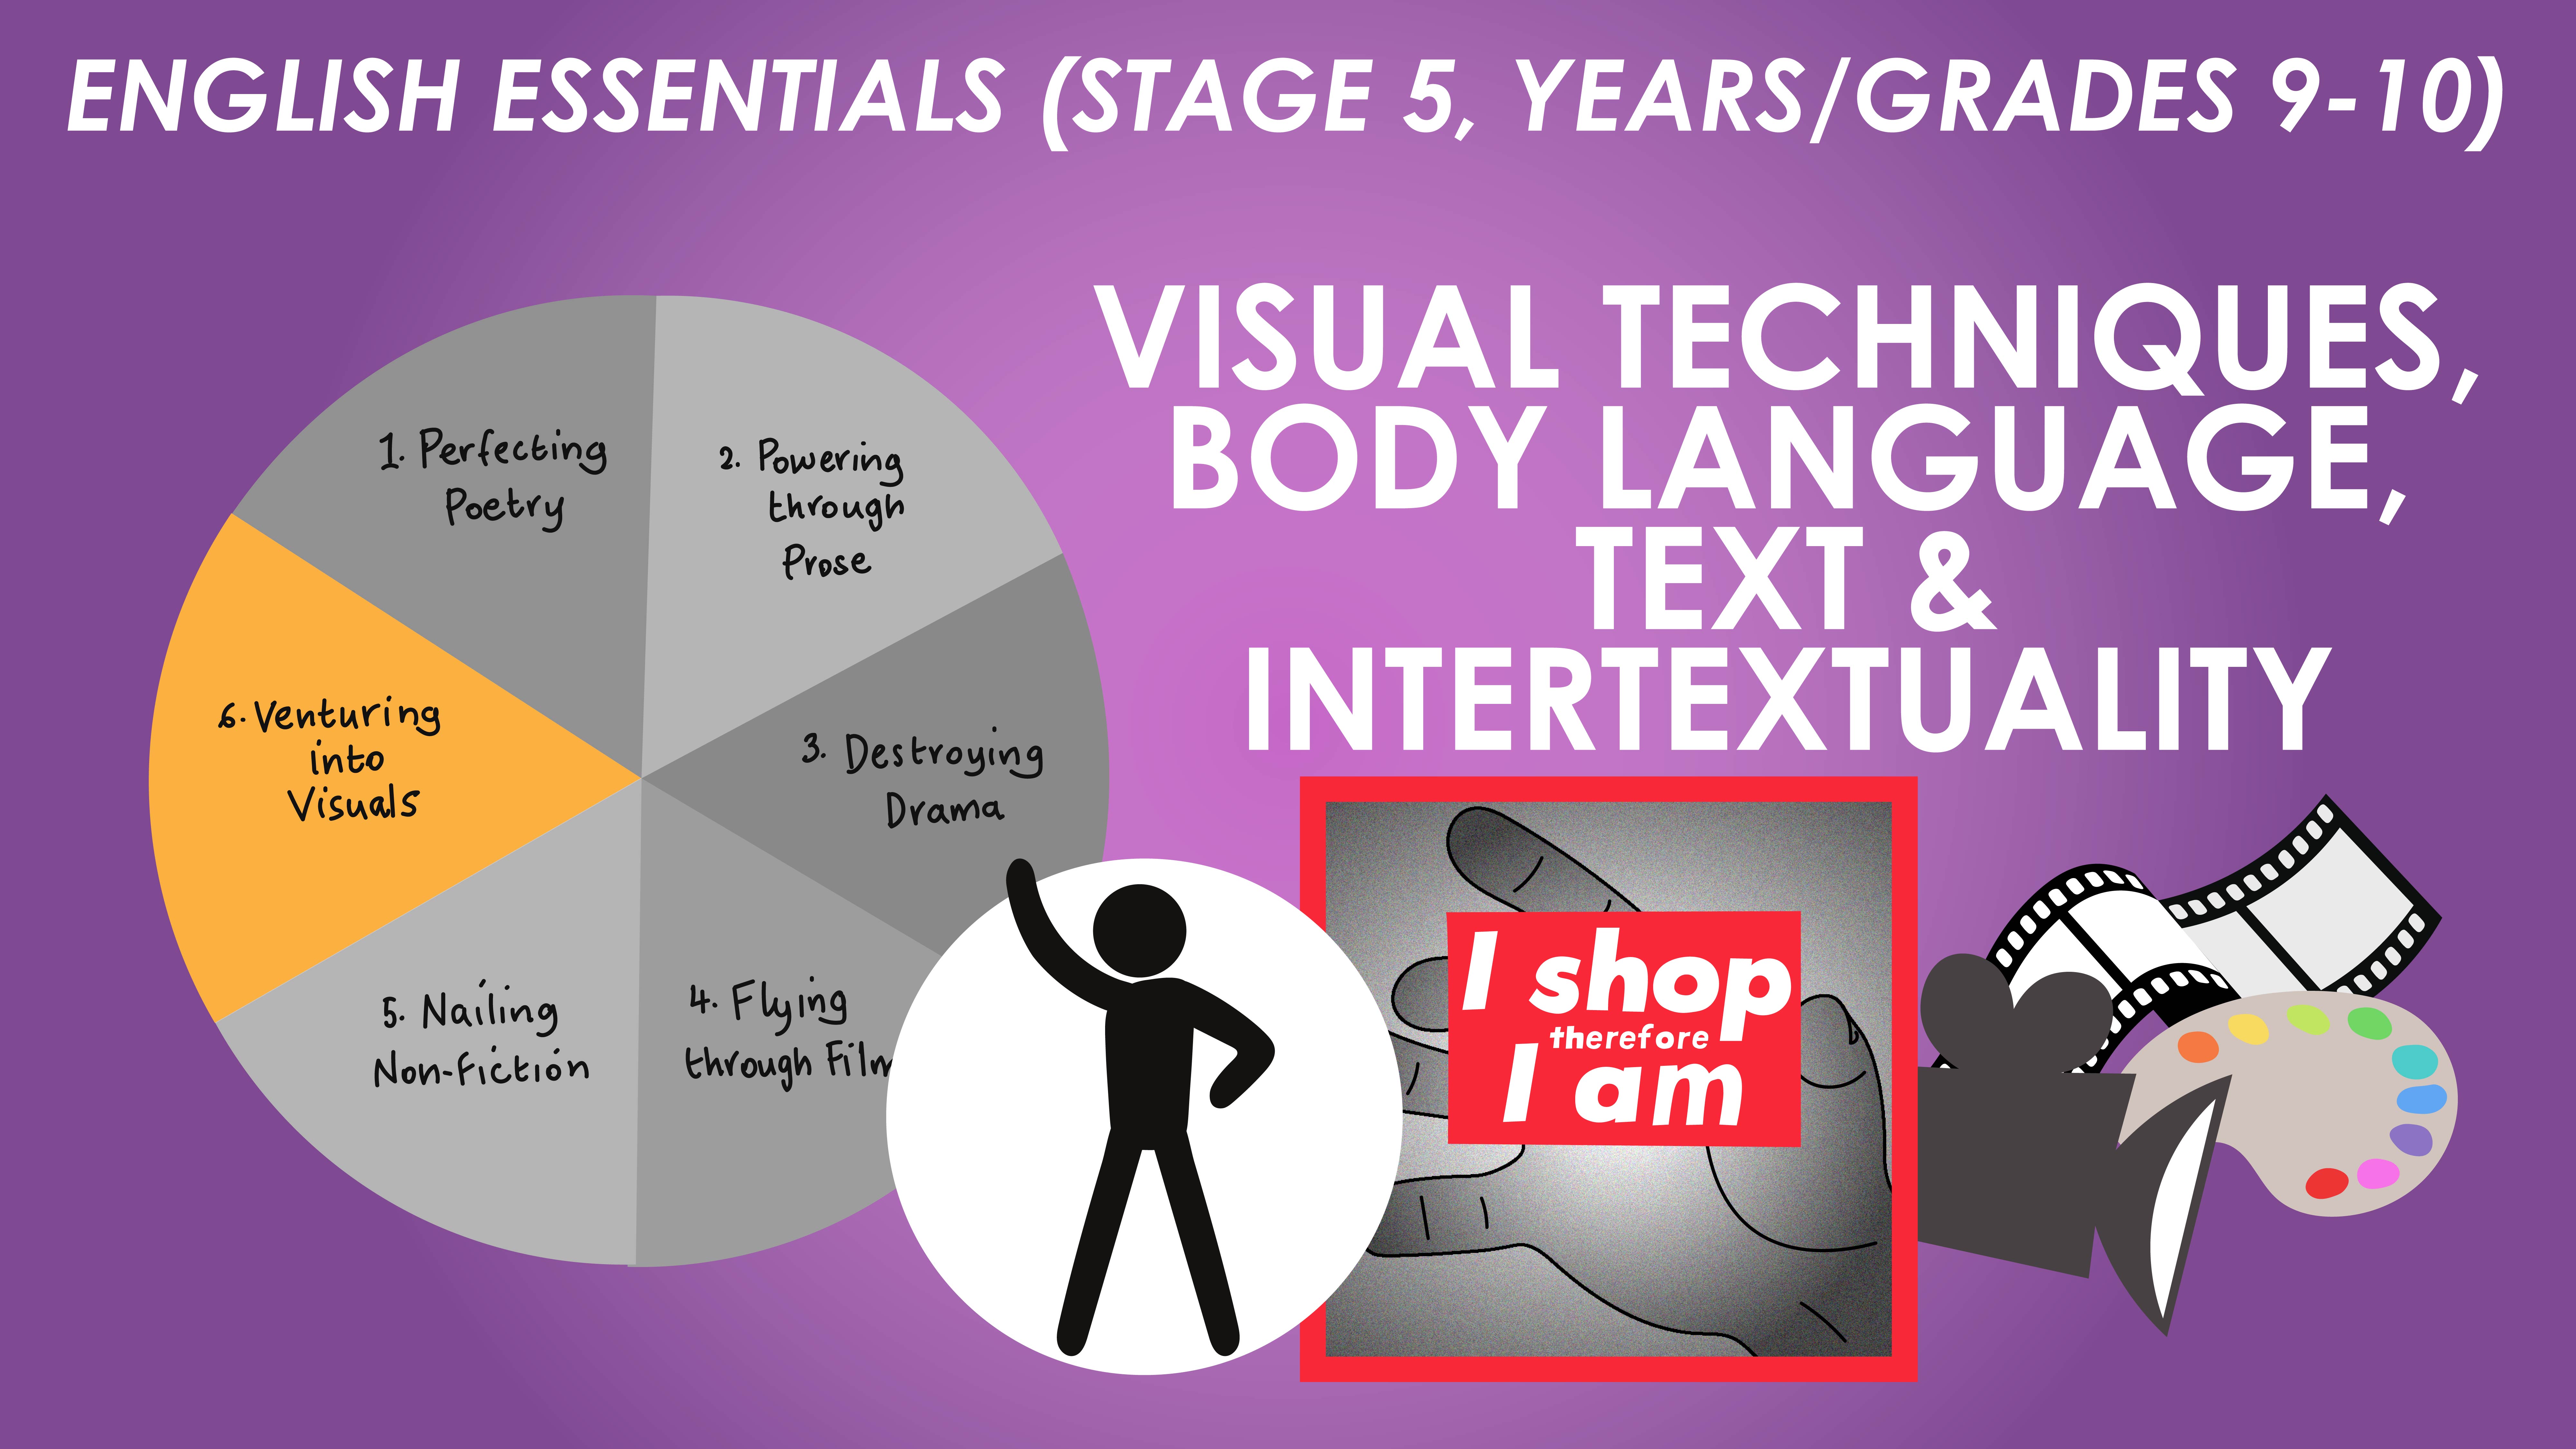 English Essentials - Venturing into Visuals - Visual Techniques, Body Language, Text & Intertextuality (Stage 5, Years/Grades 9-10)